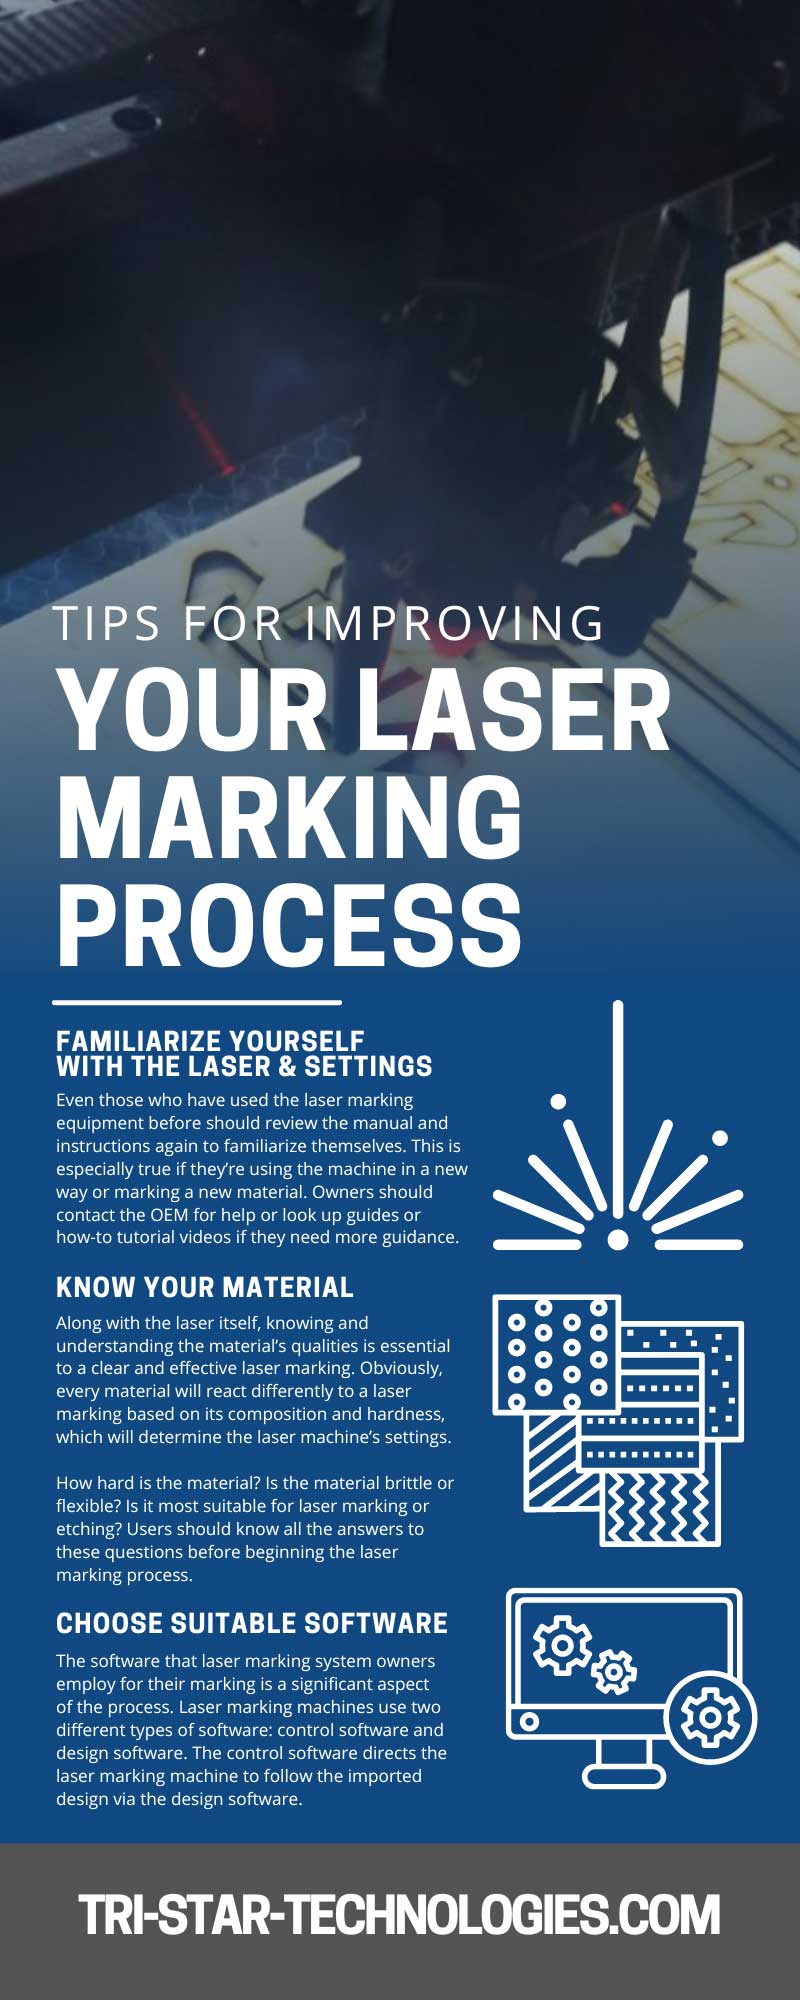 10 Tips for Improving Your Laser Marking Process